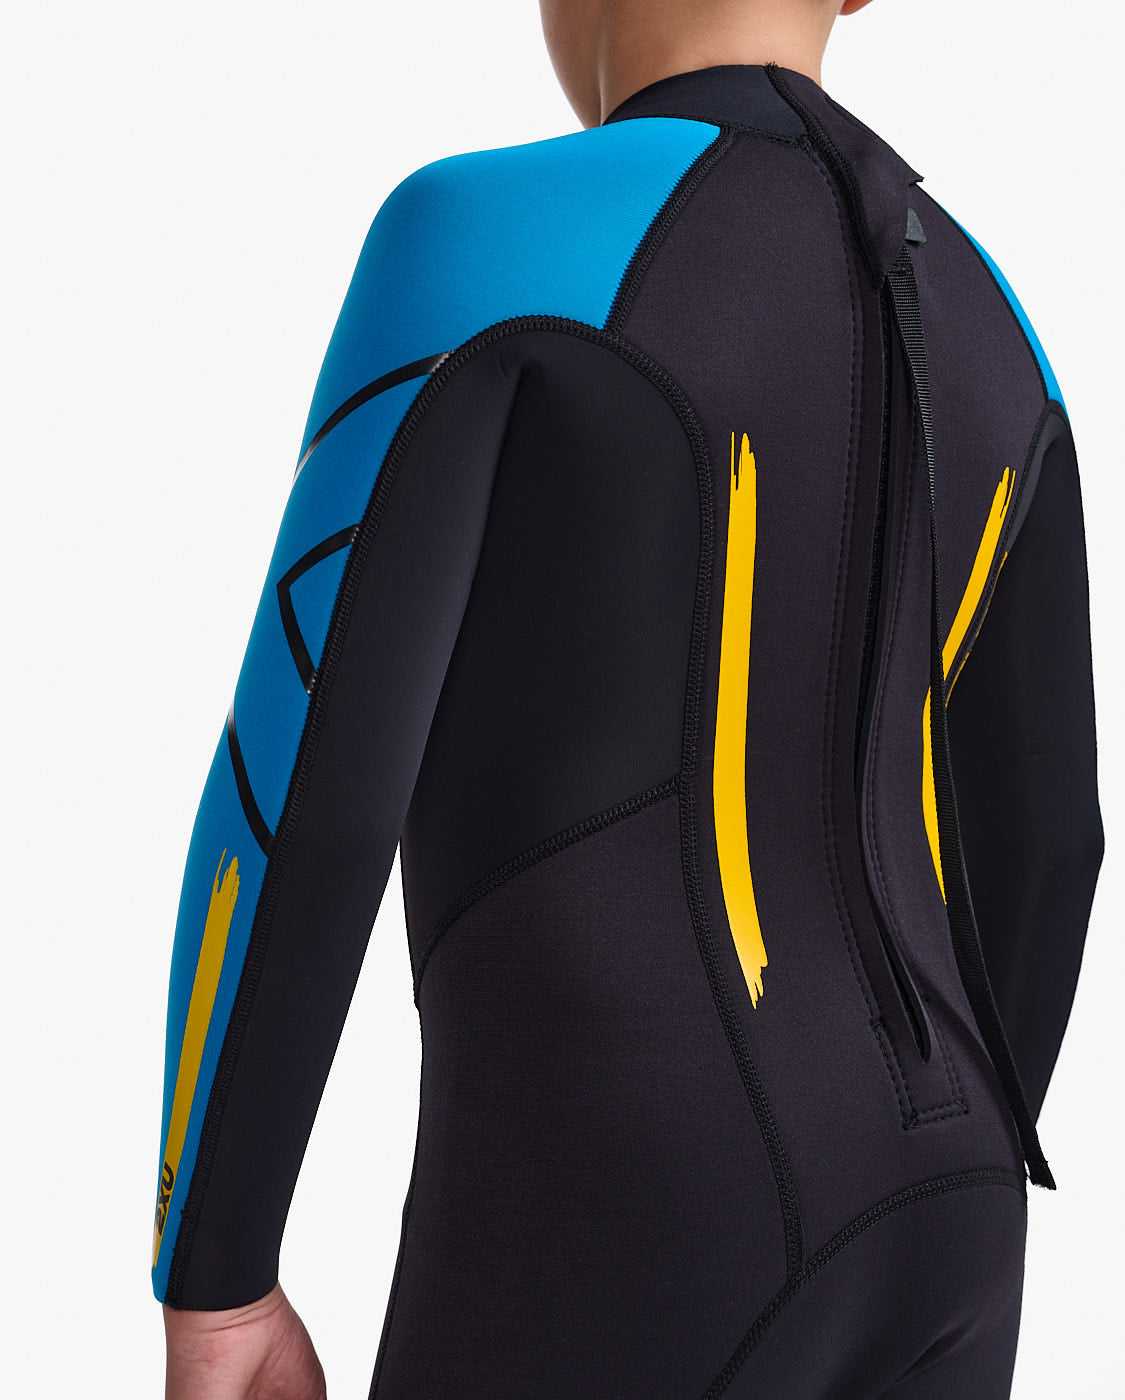 Propel Youth Wetsuit